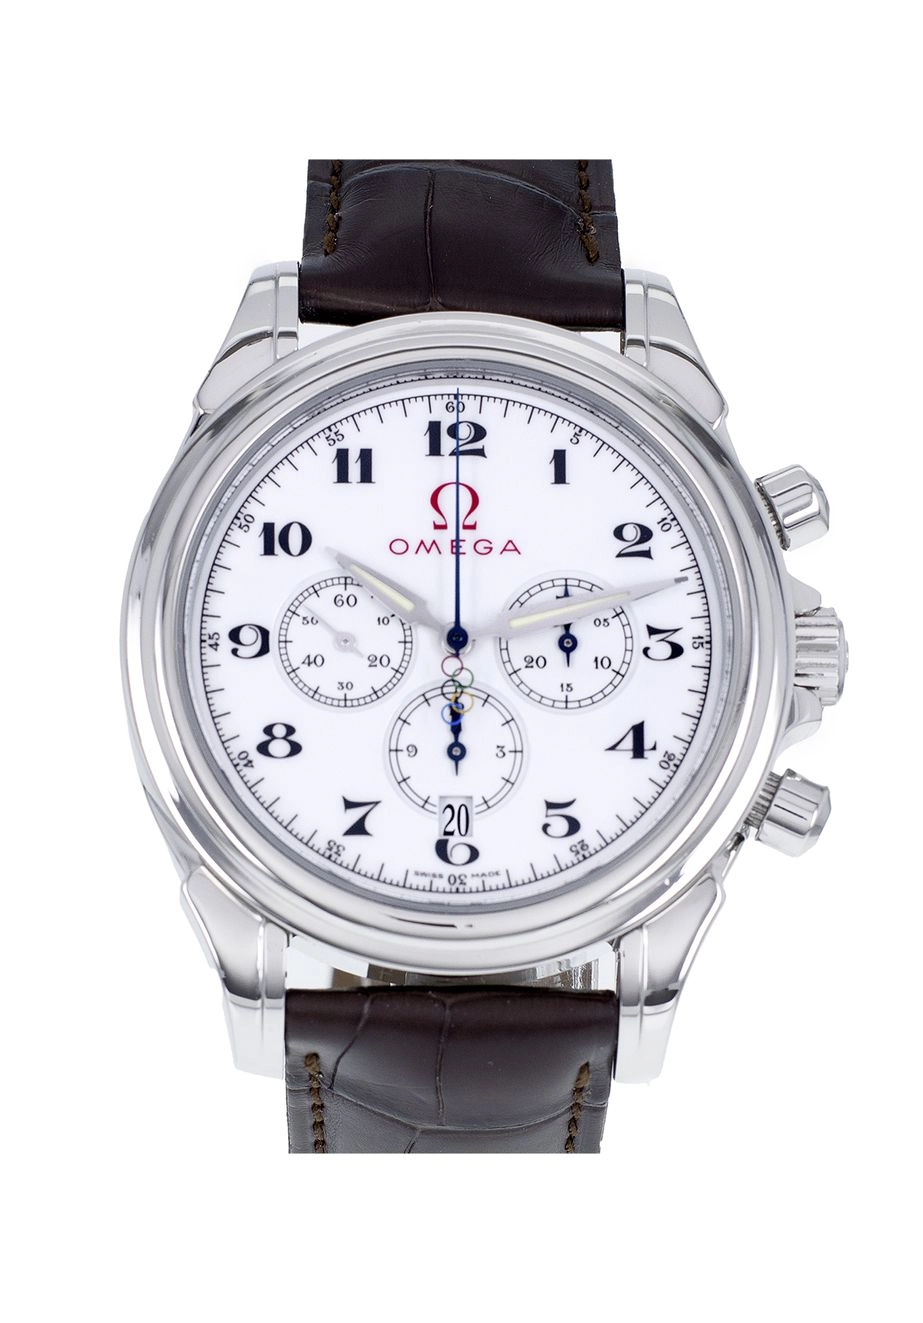 OMEGA De Ville Specialities Collection Olympique Timeless